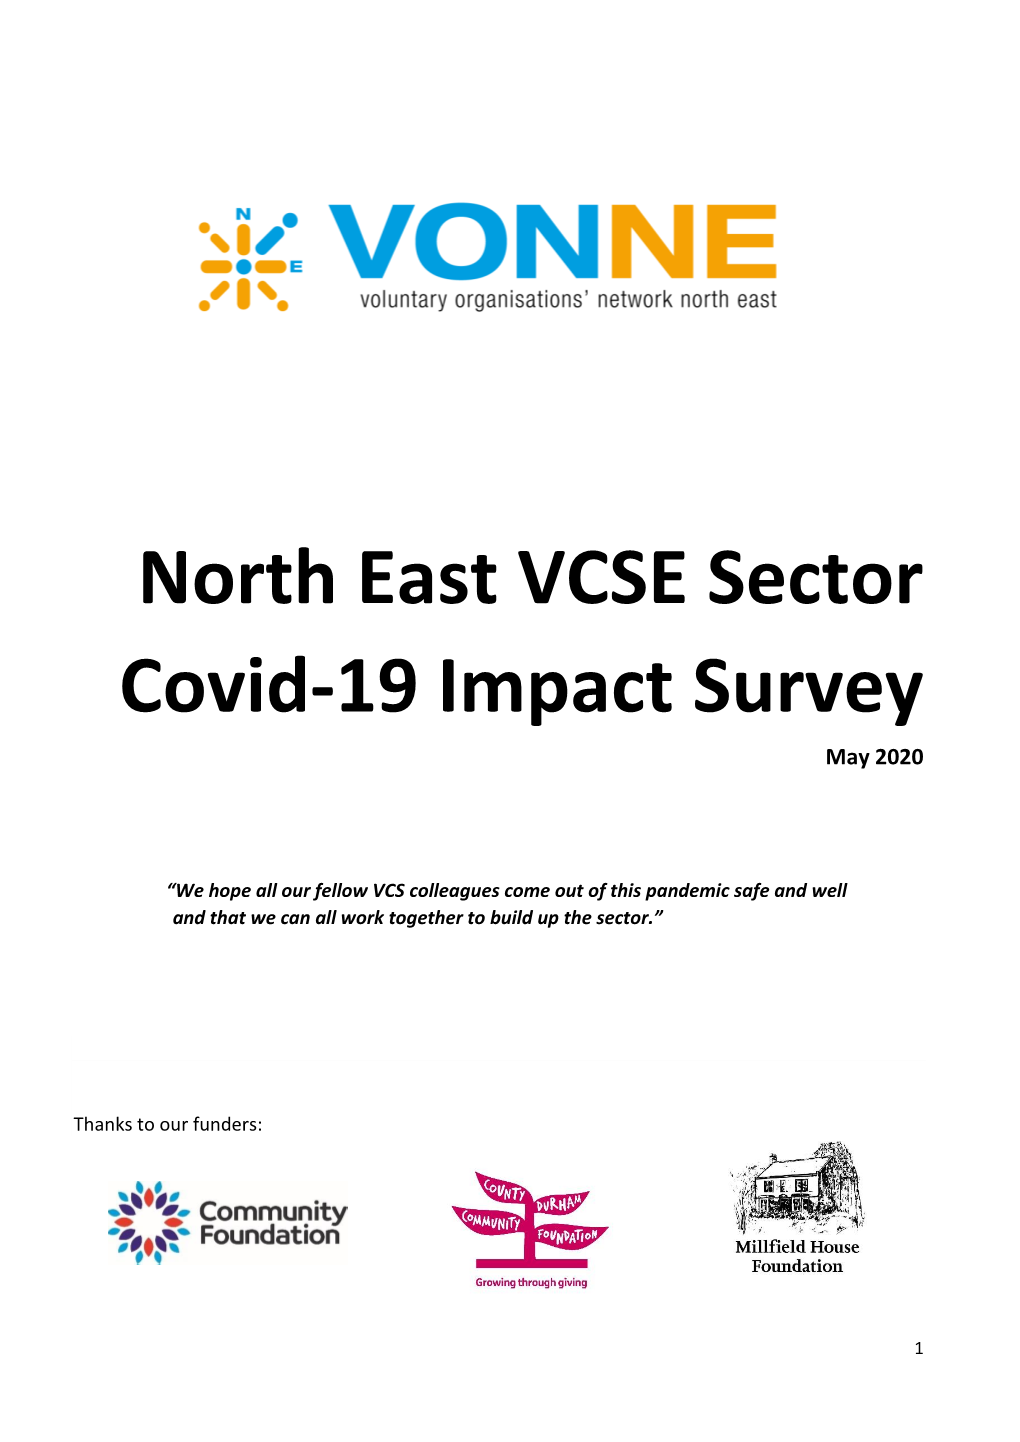 North East VCSE Sector Covid-19 Impact Survey May 2020